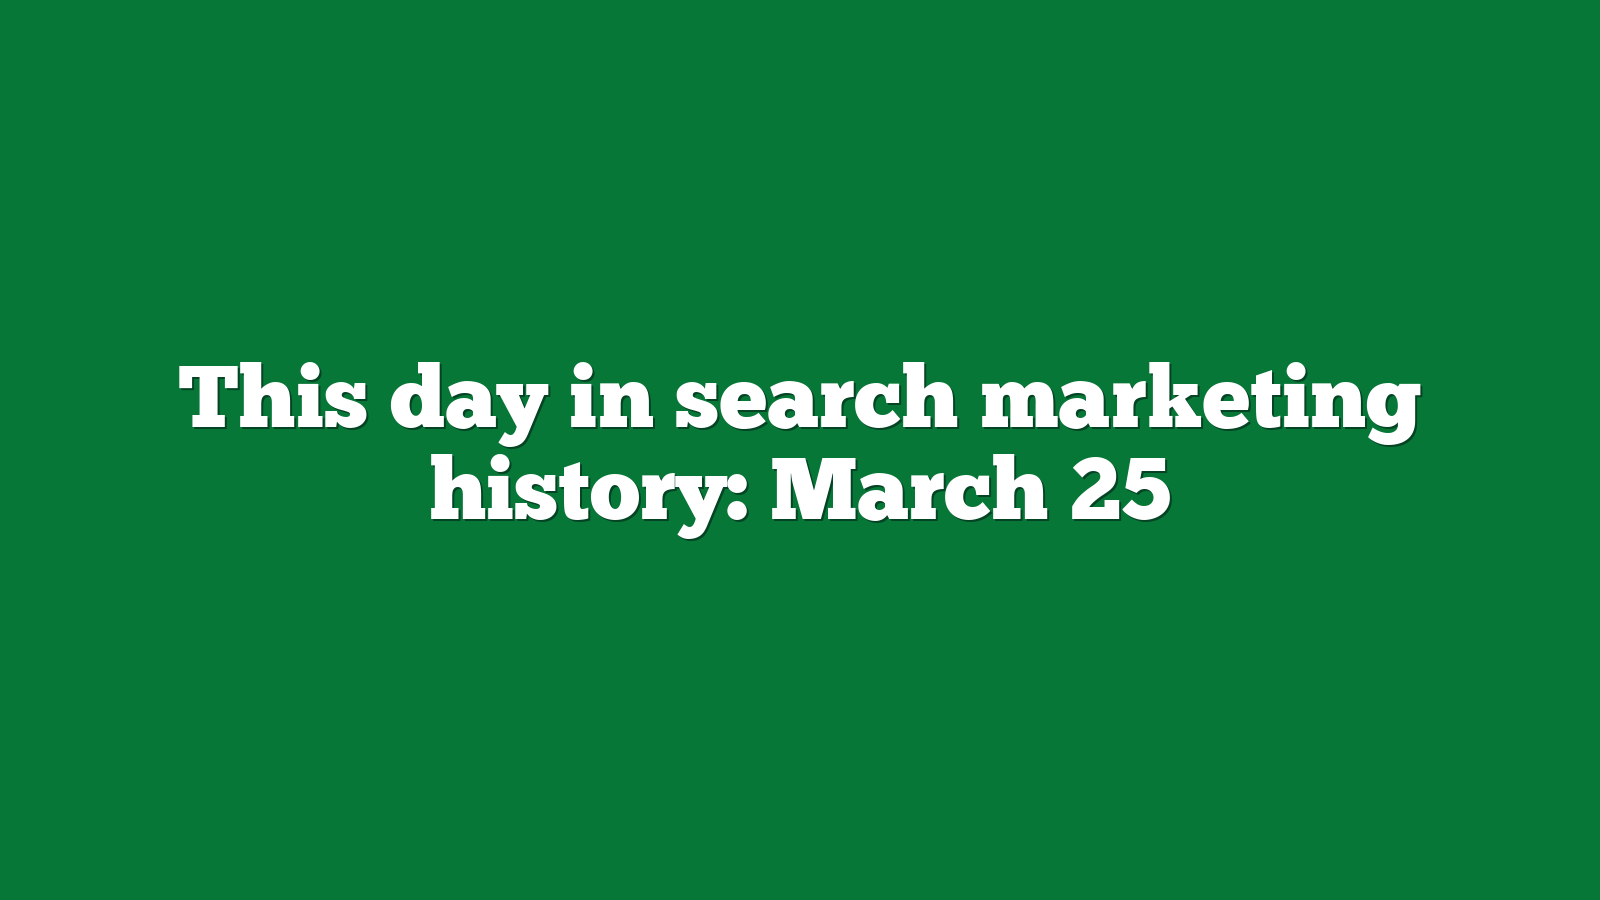 This day in search marketing history March 25